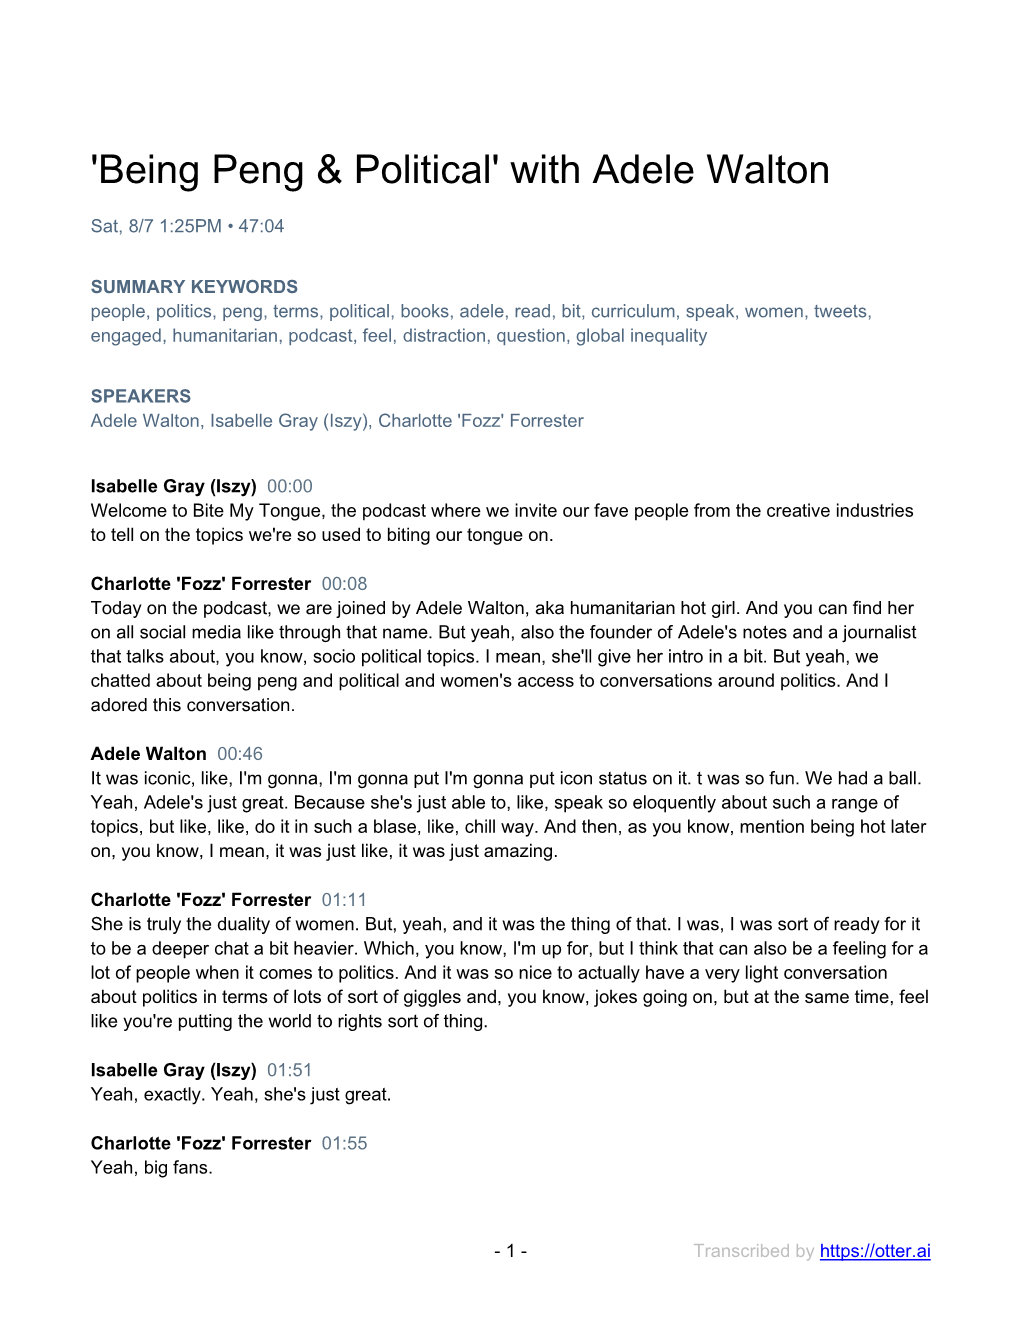 'Being Peng & Political' with Adele Walton